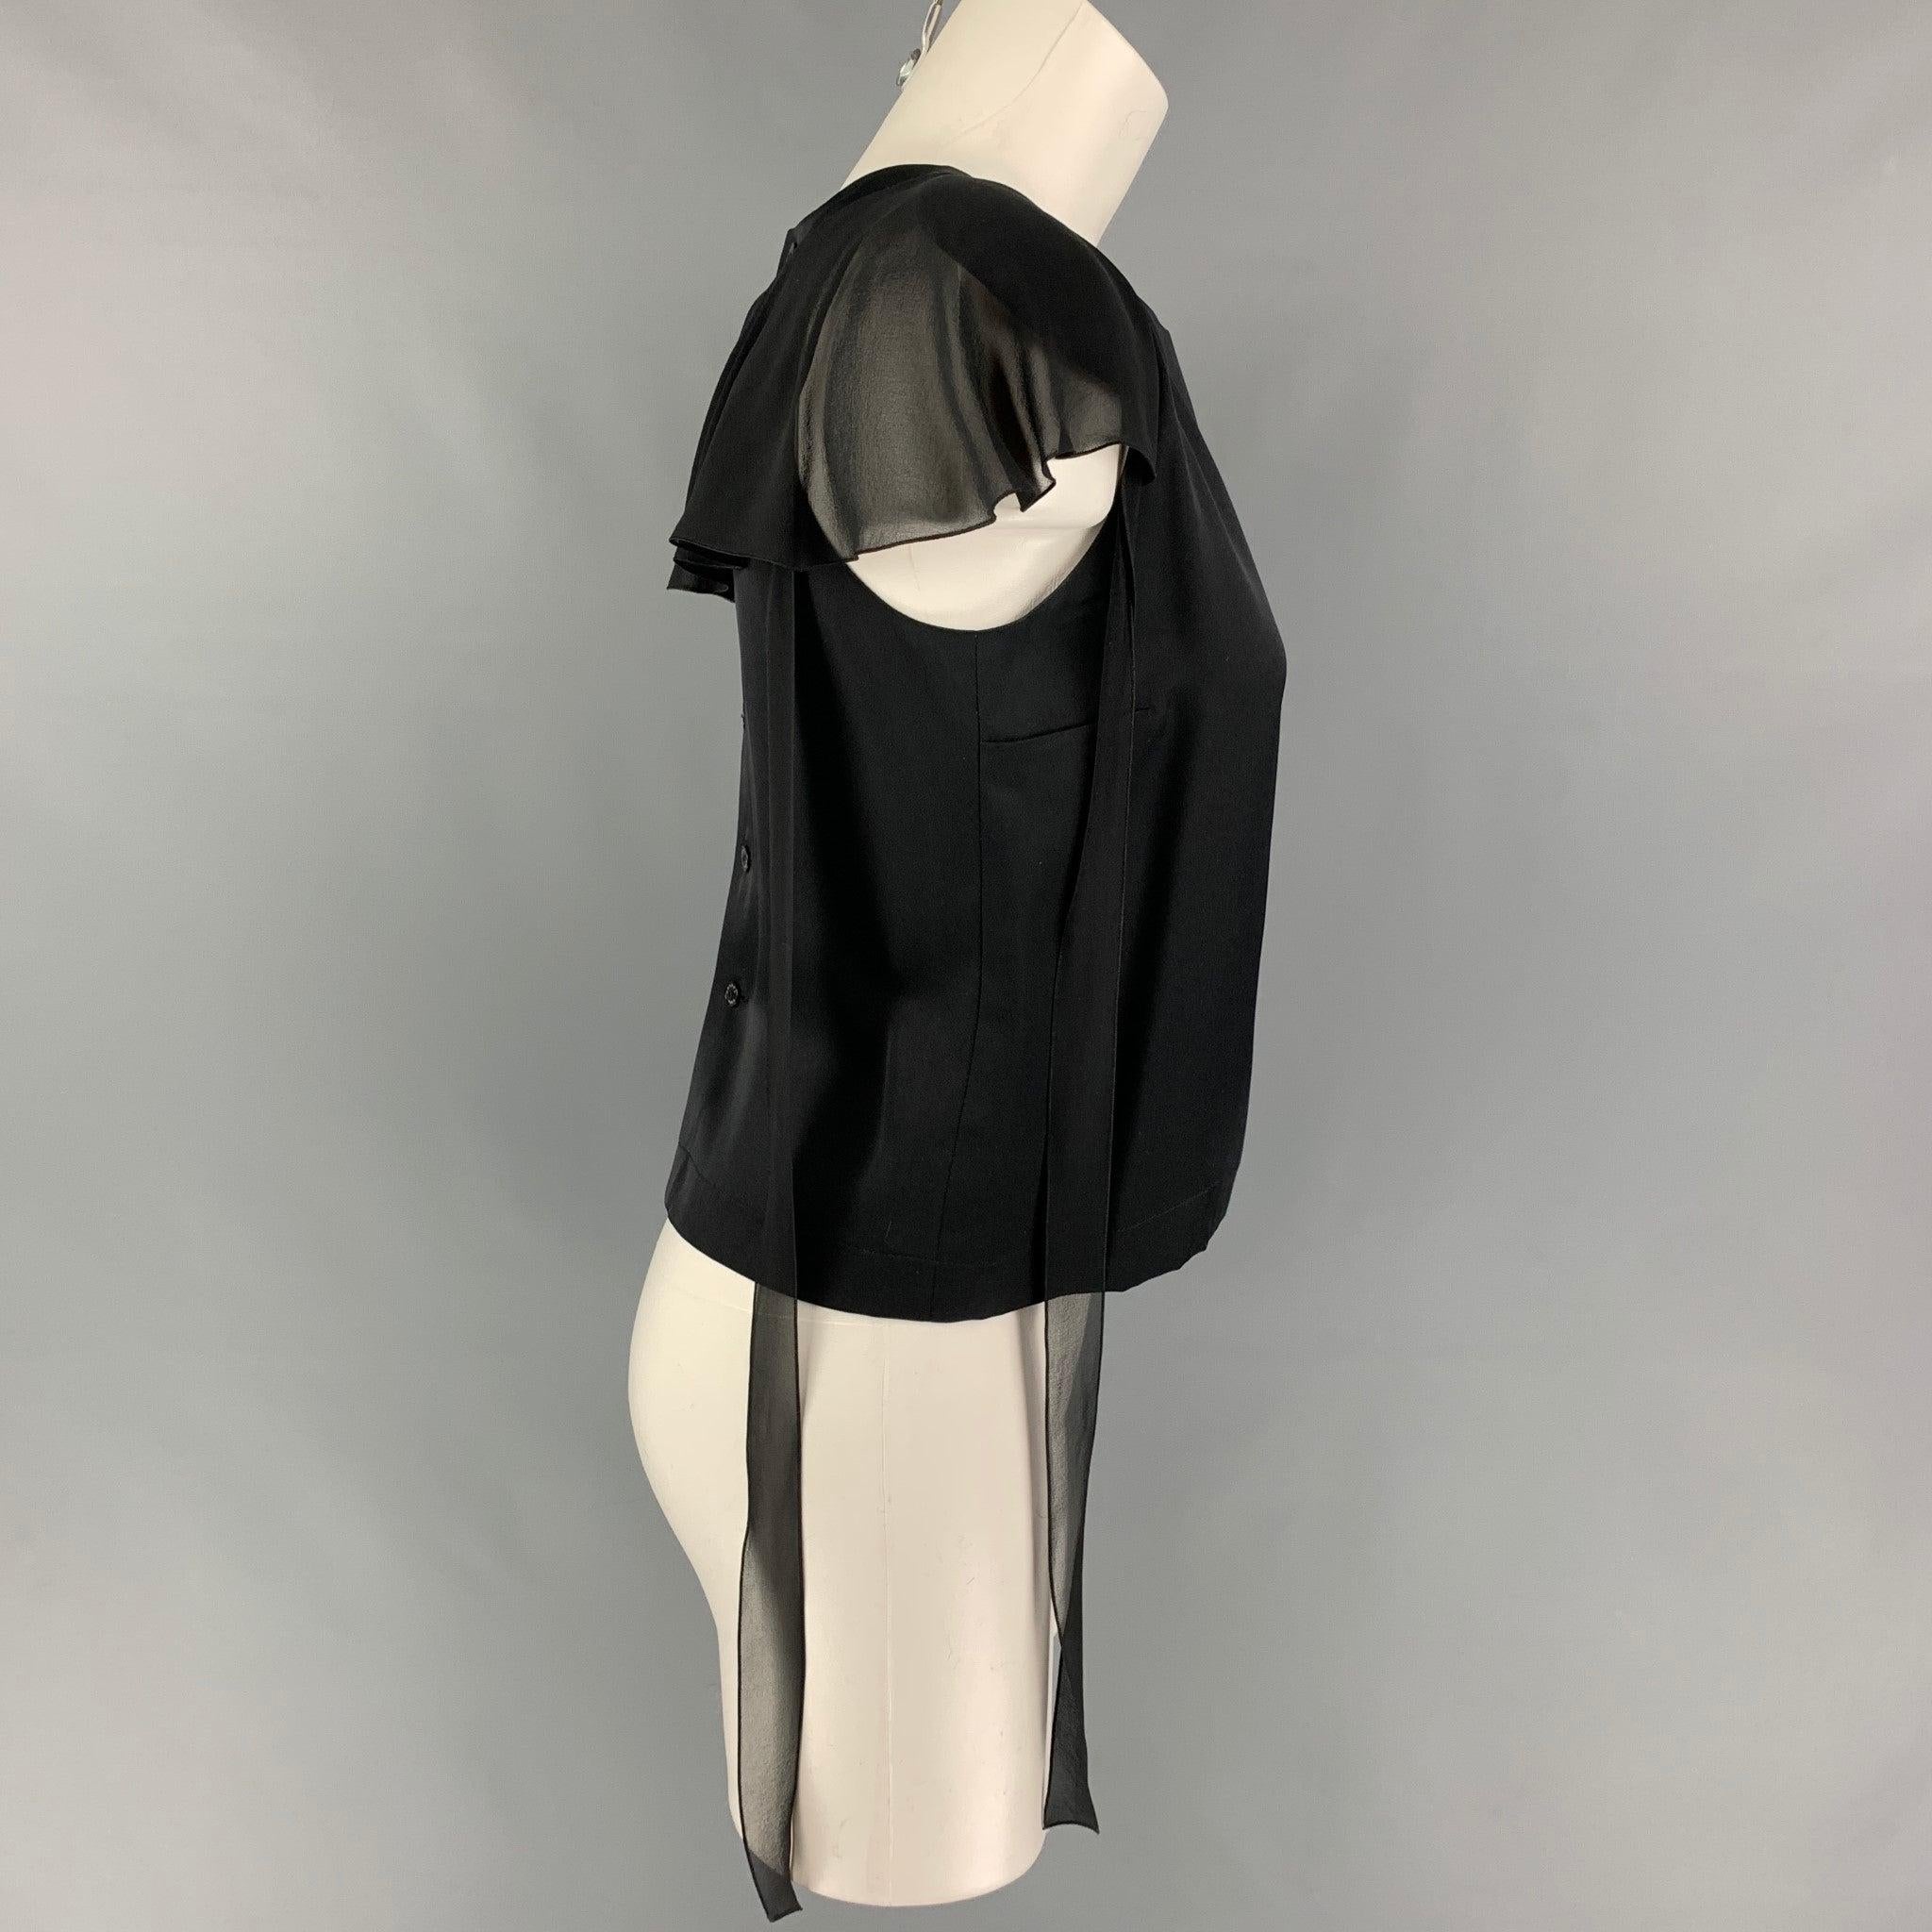 CHANEL top comes in a black silk featuring shoulder pads, strap details, ruffled panel, and a back button closure. Made in France.
Very Good
Pre-Owned Condition. 

Marked:   94305 03A / 36 

Measurements: 
 
Shoulder: 9.5 inches  Bust: 33 inches 